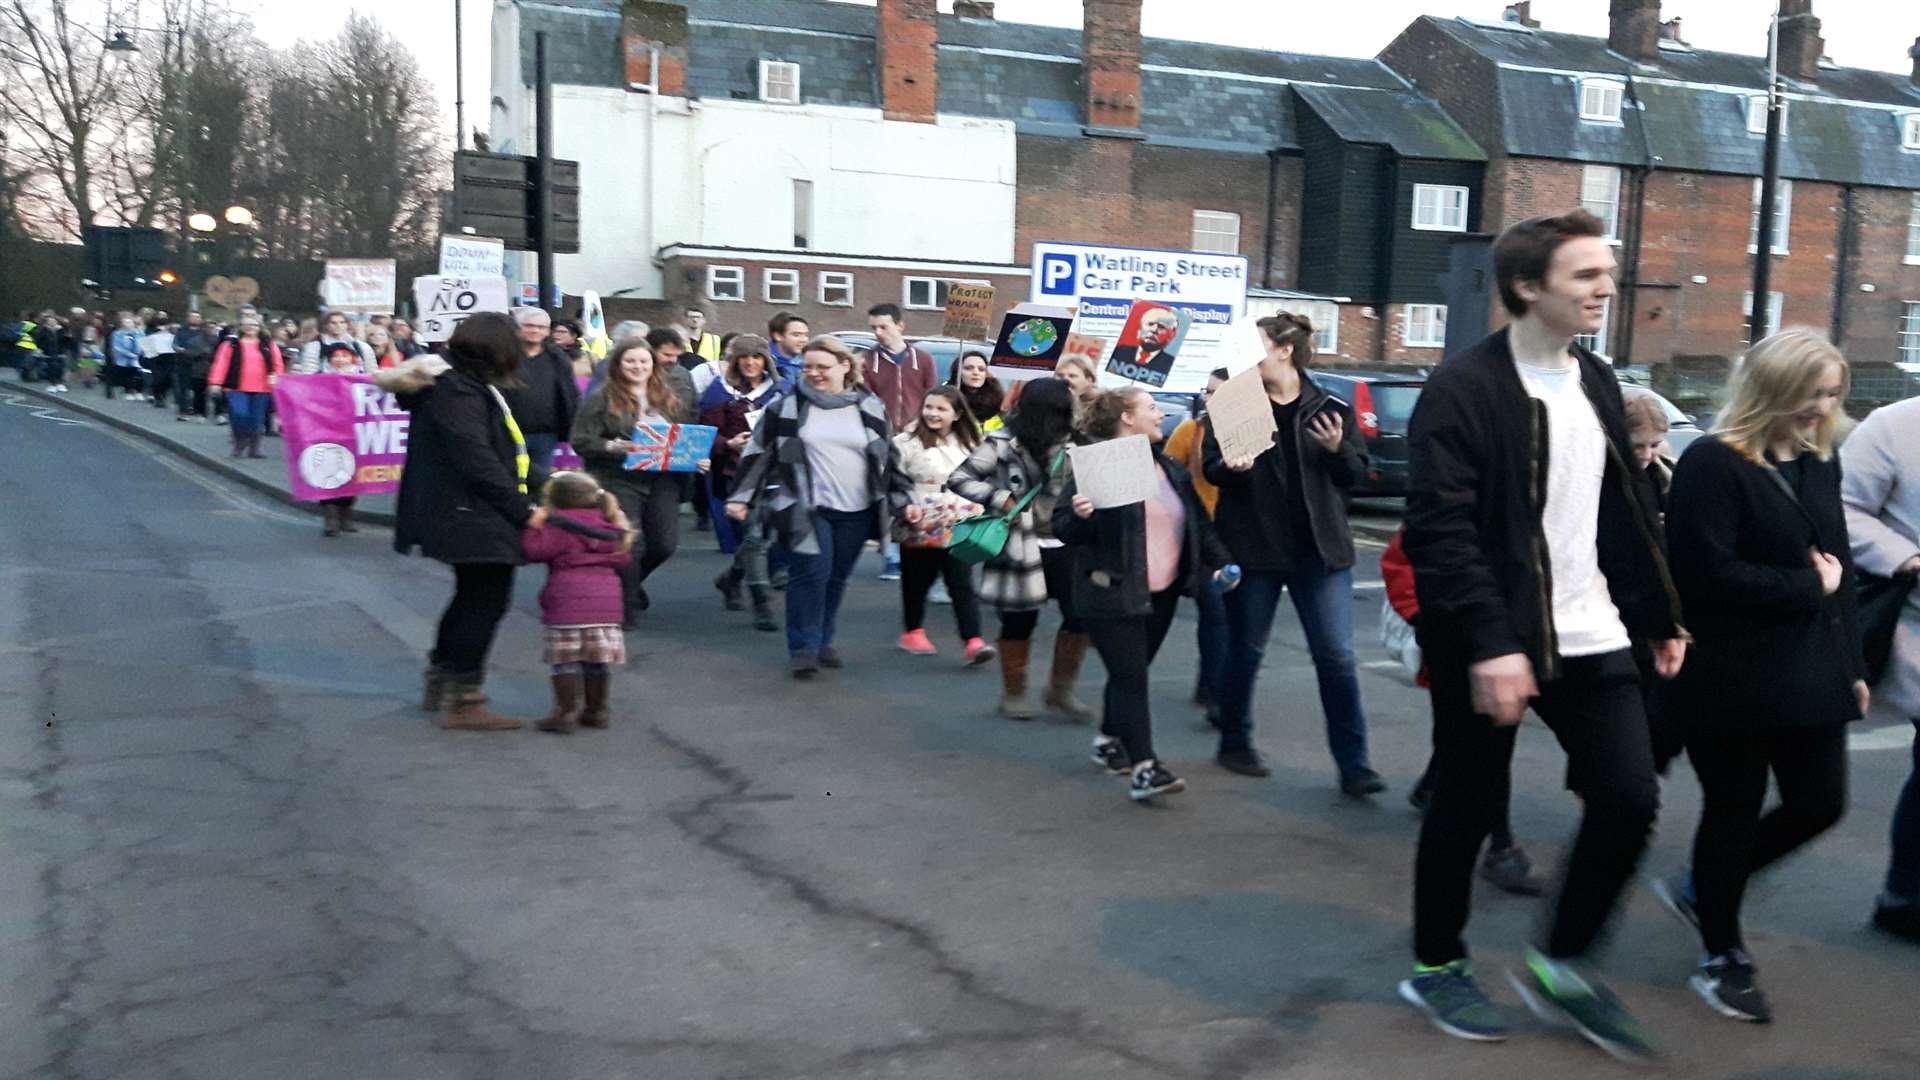 The protesters in Watling Street.